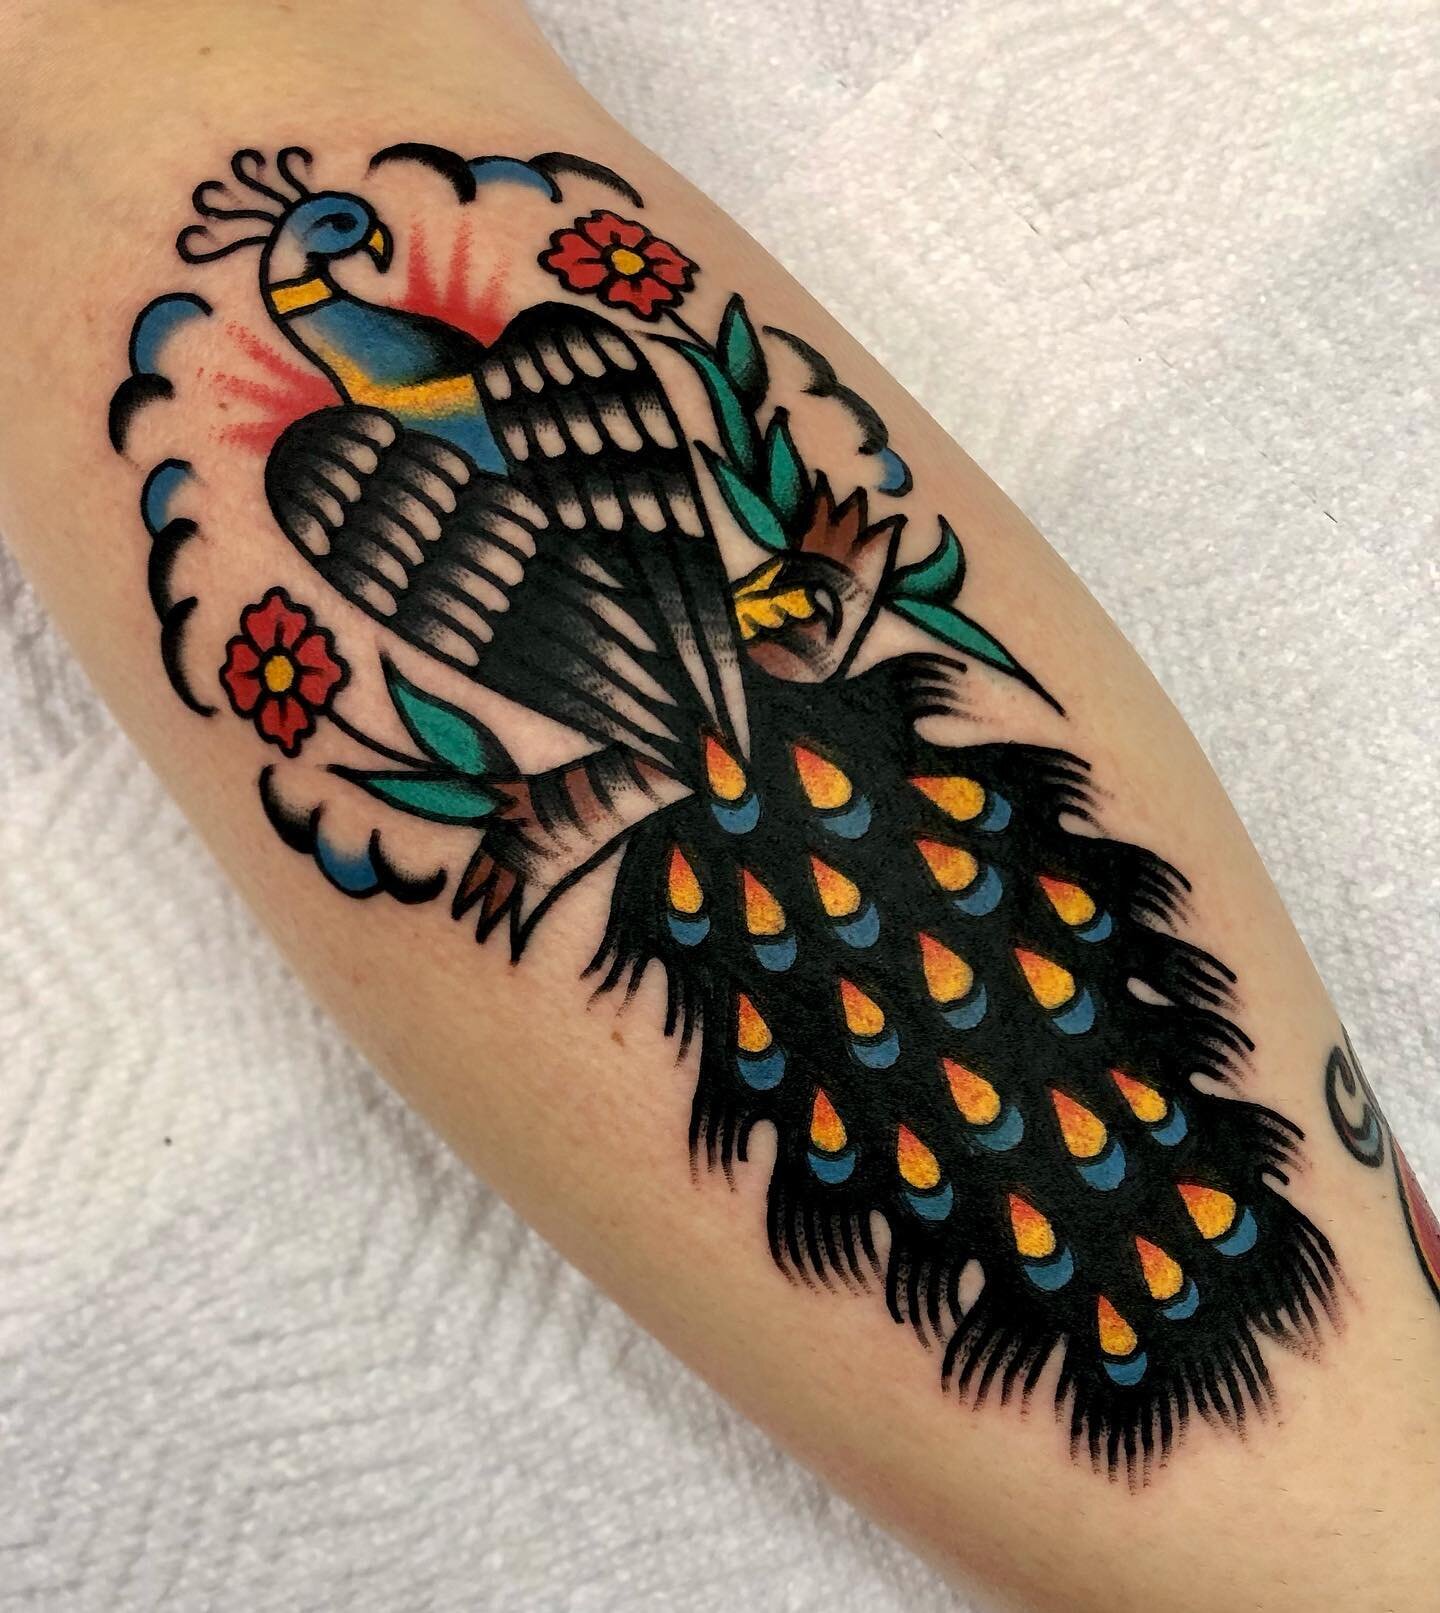 Really fun peacock from a few days back. Thanks for looking! #tattoo #tattoos #traditionaltattoos #bright_and_bold #skinart #oldlines #oldschooltattoo #traditionalclub #tattooing #tattooart #tradworkers #tradtattoo #tradwork #americantraditional #bes